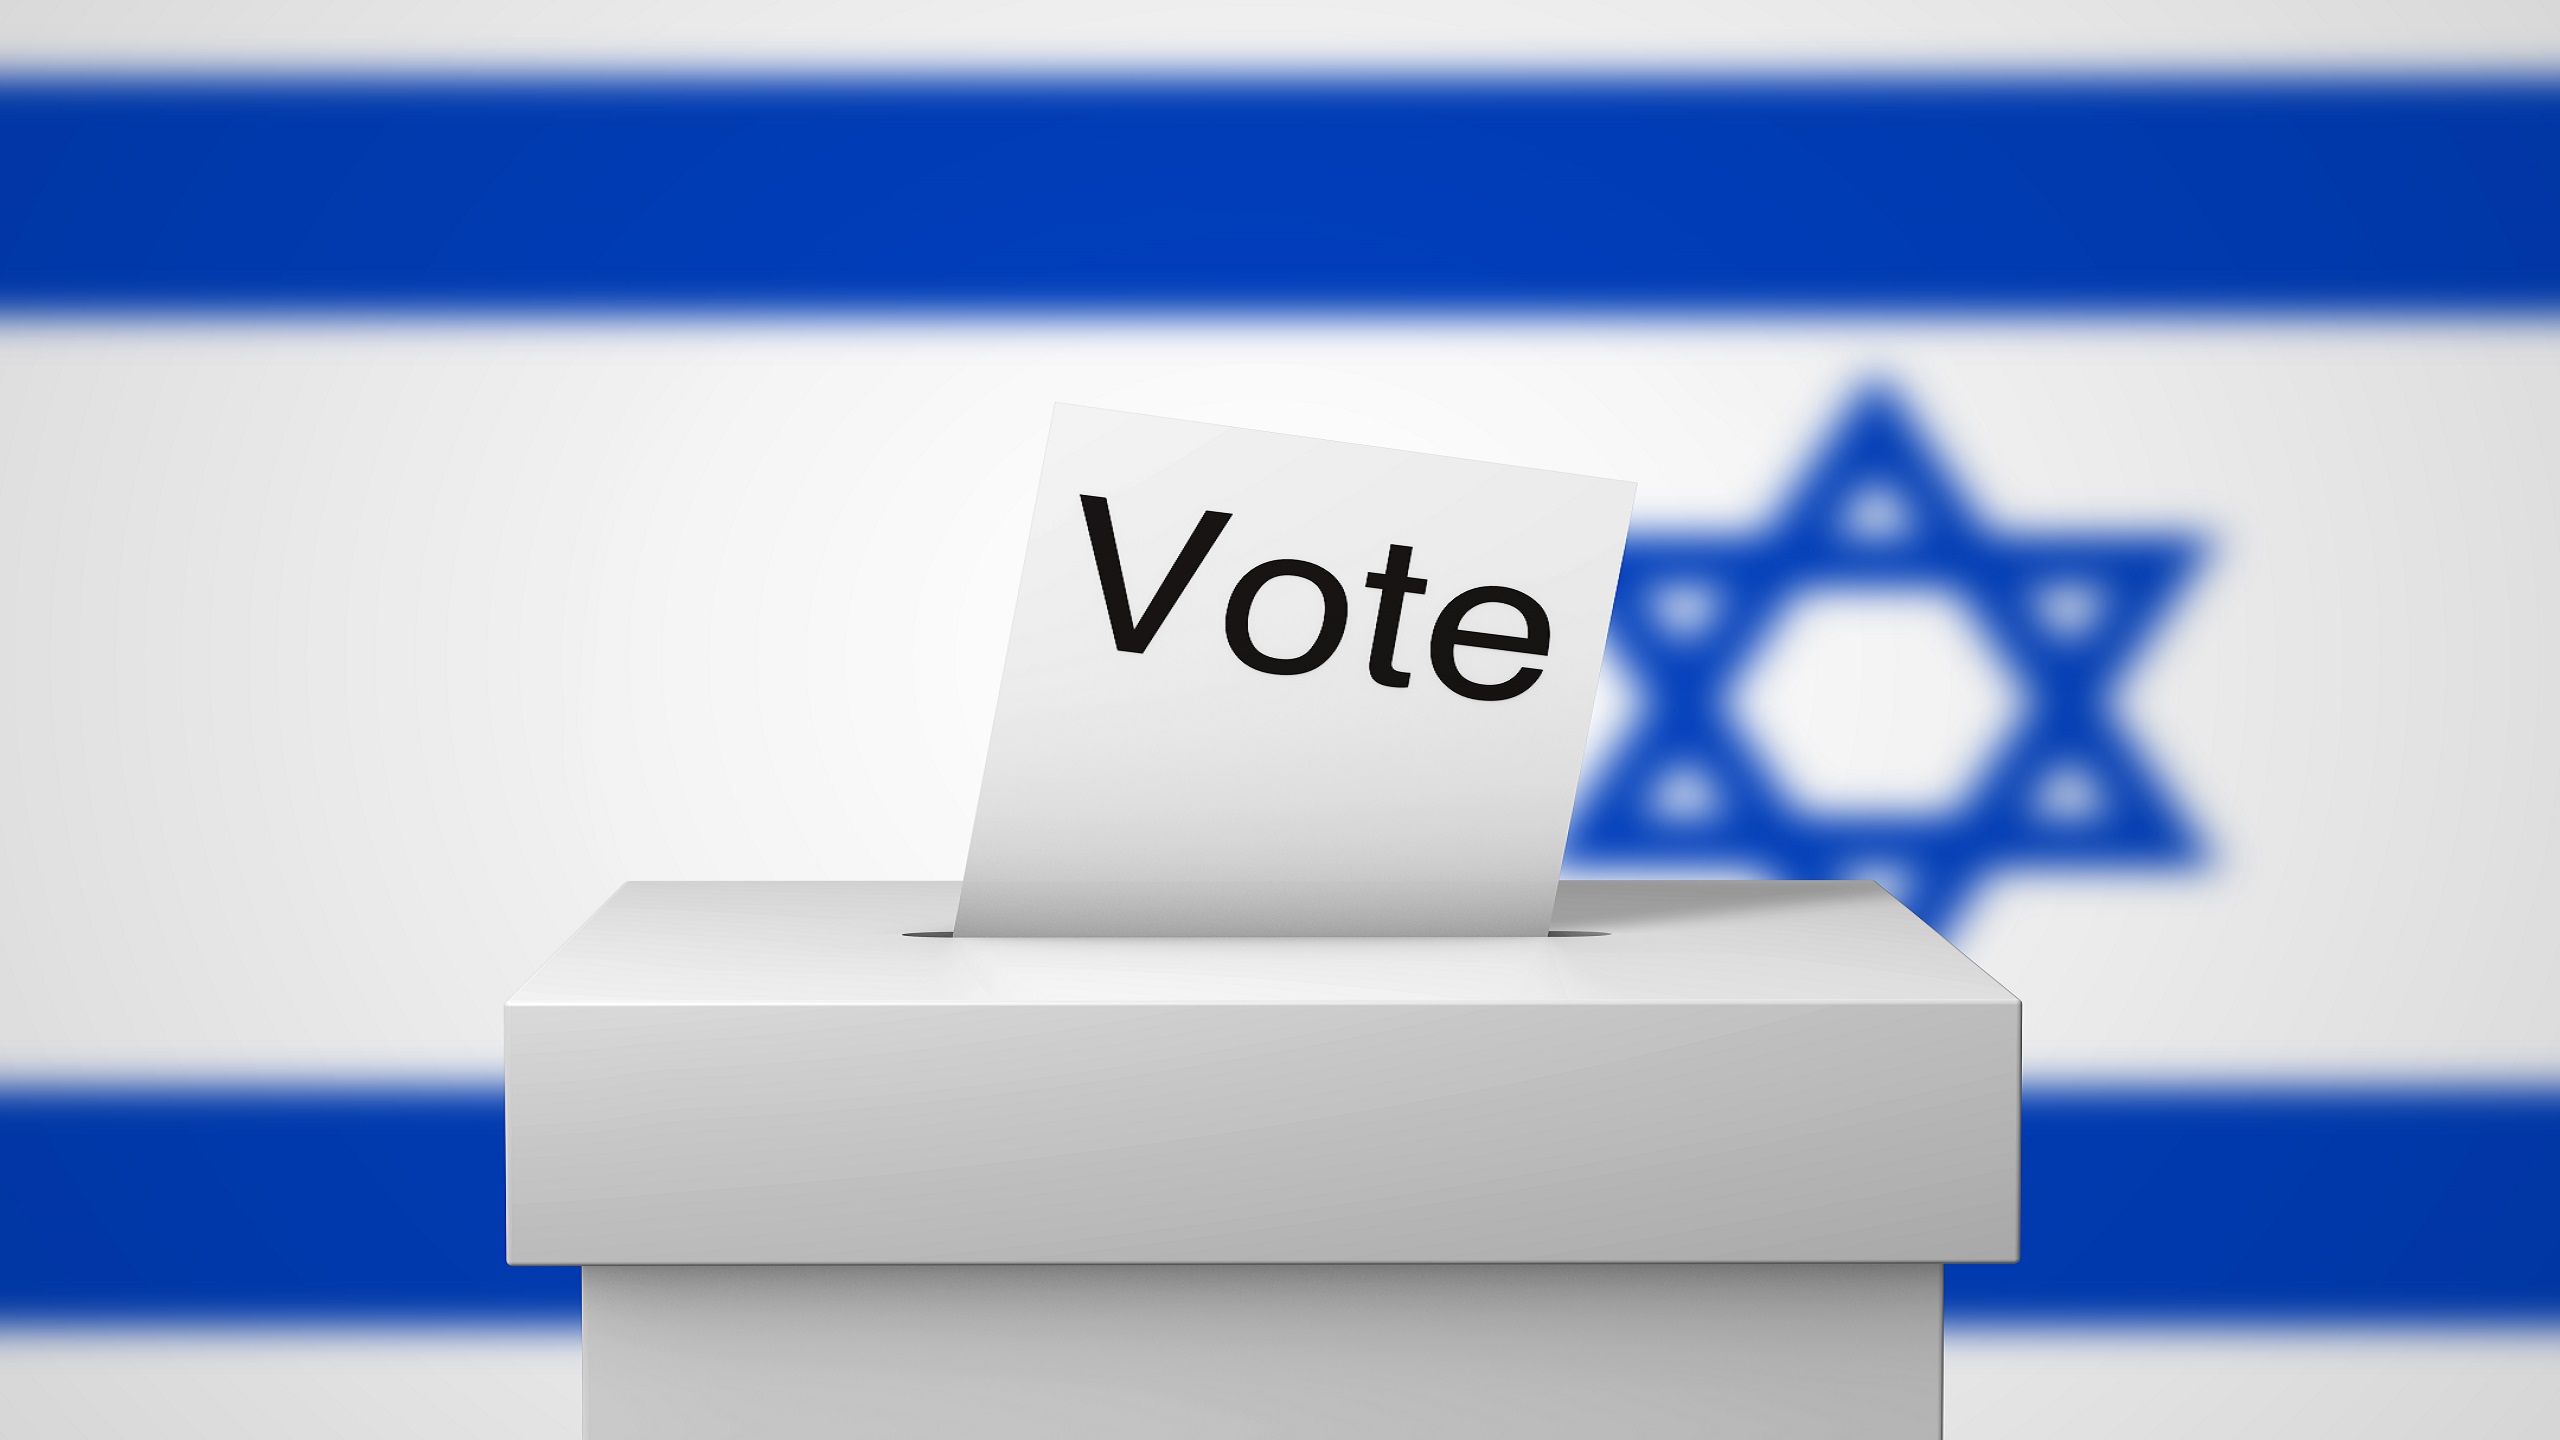 Will Arab Voters Appoint the Prime Minister of Israel?